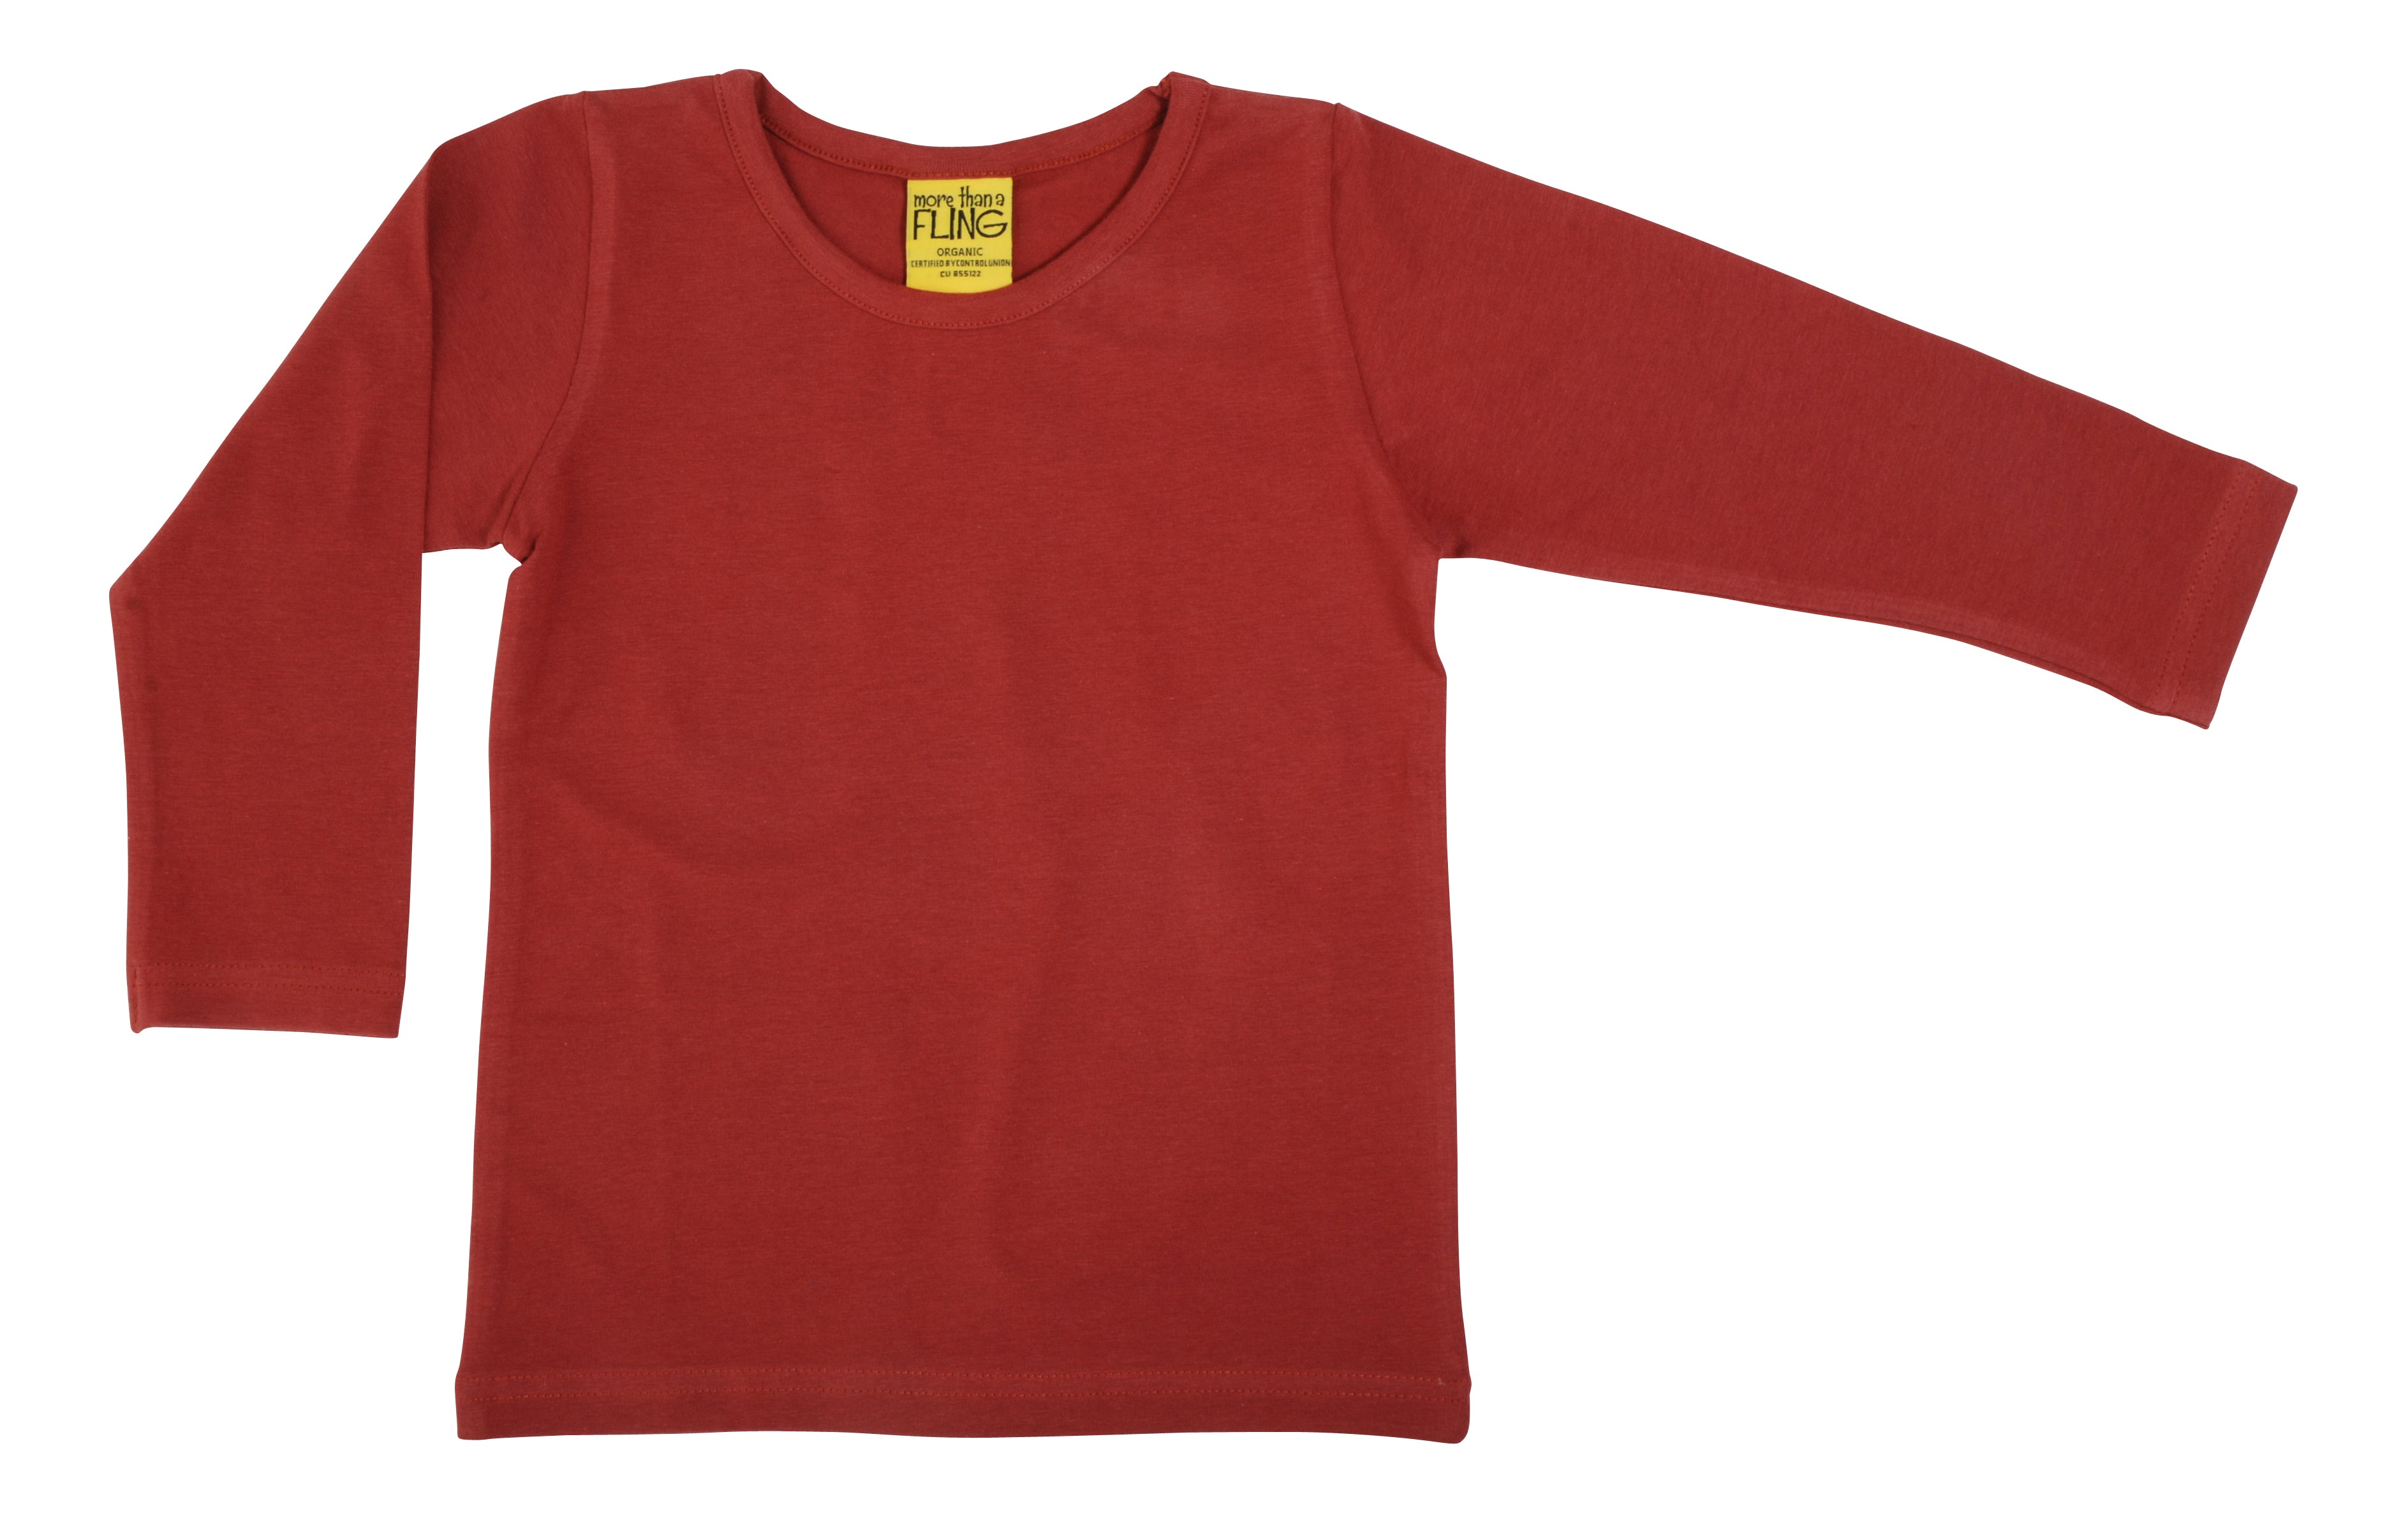 More Than A Fling - LS Tee - Brick Red